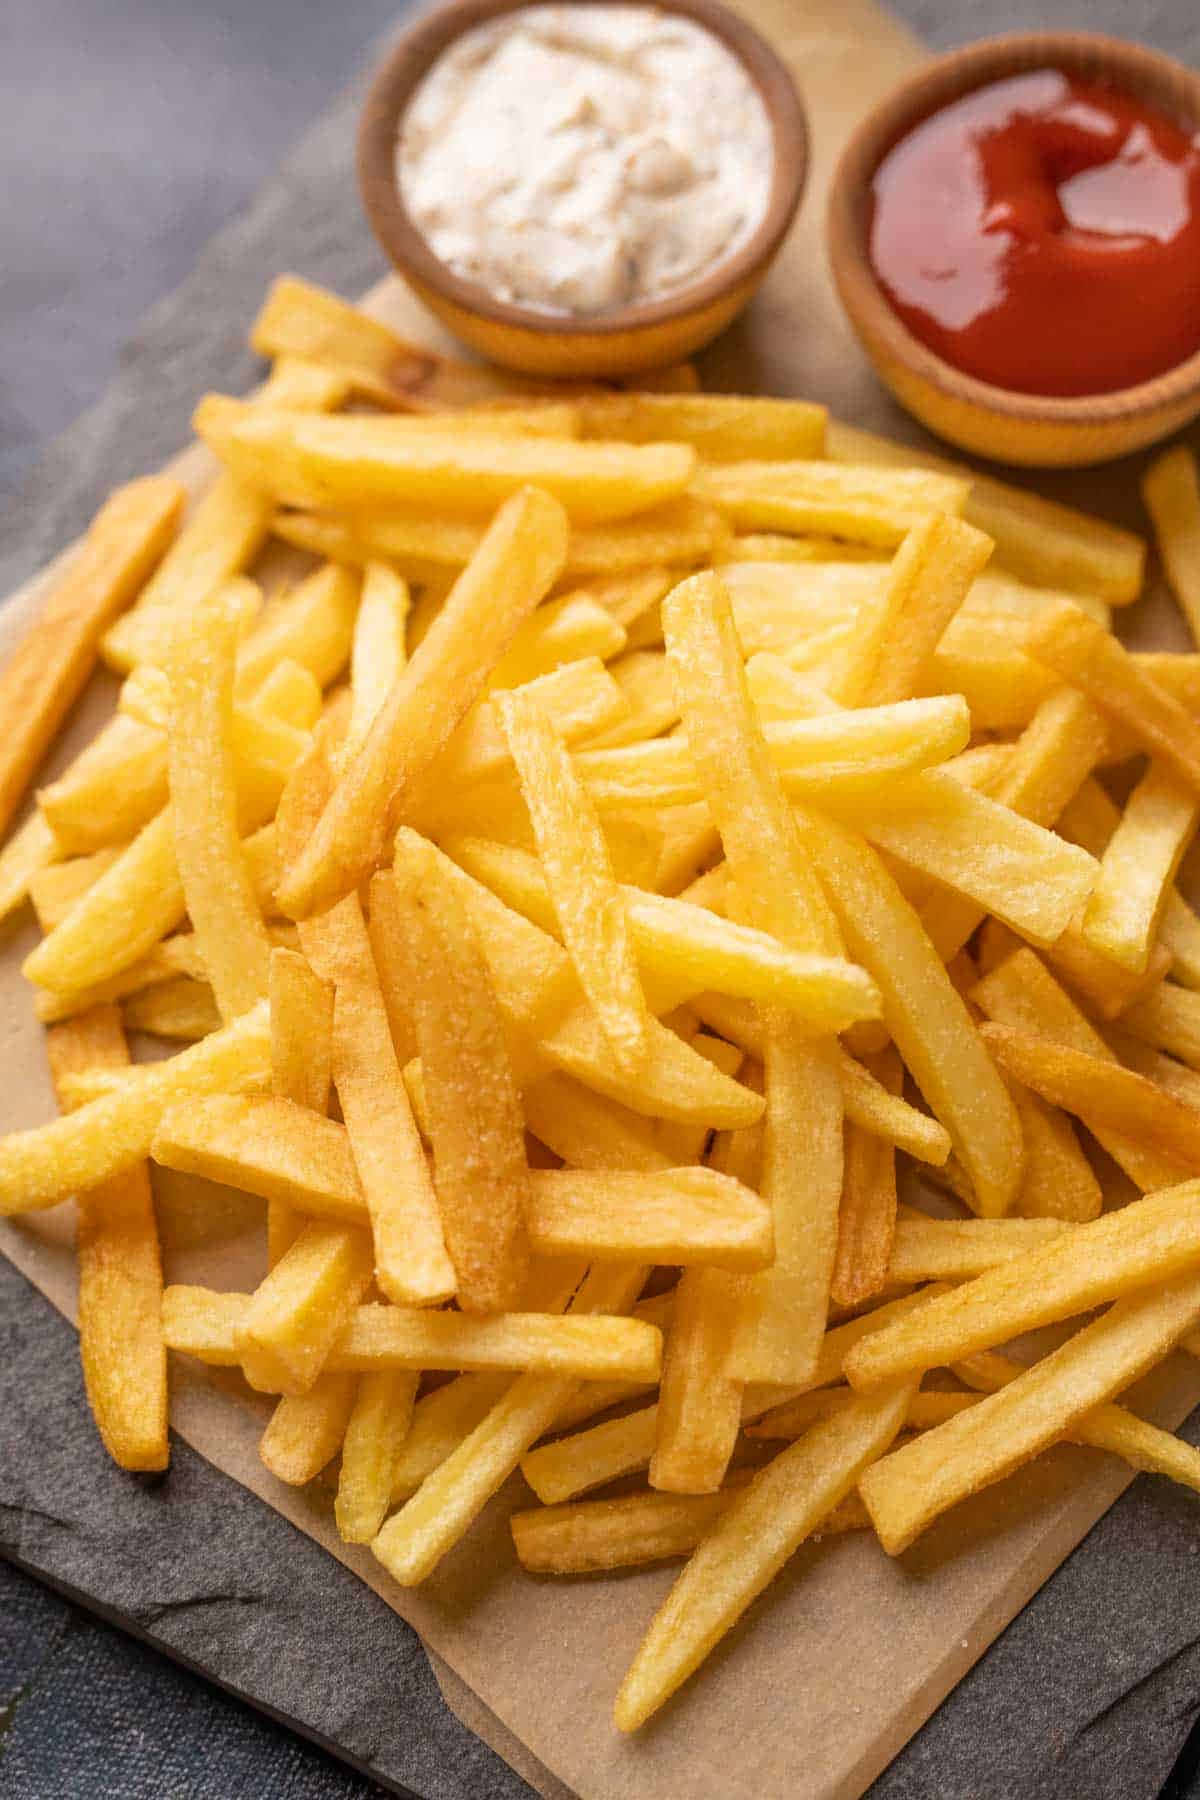 Enjoying a Delicious Plate of French Fries